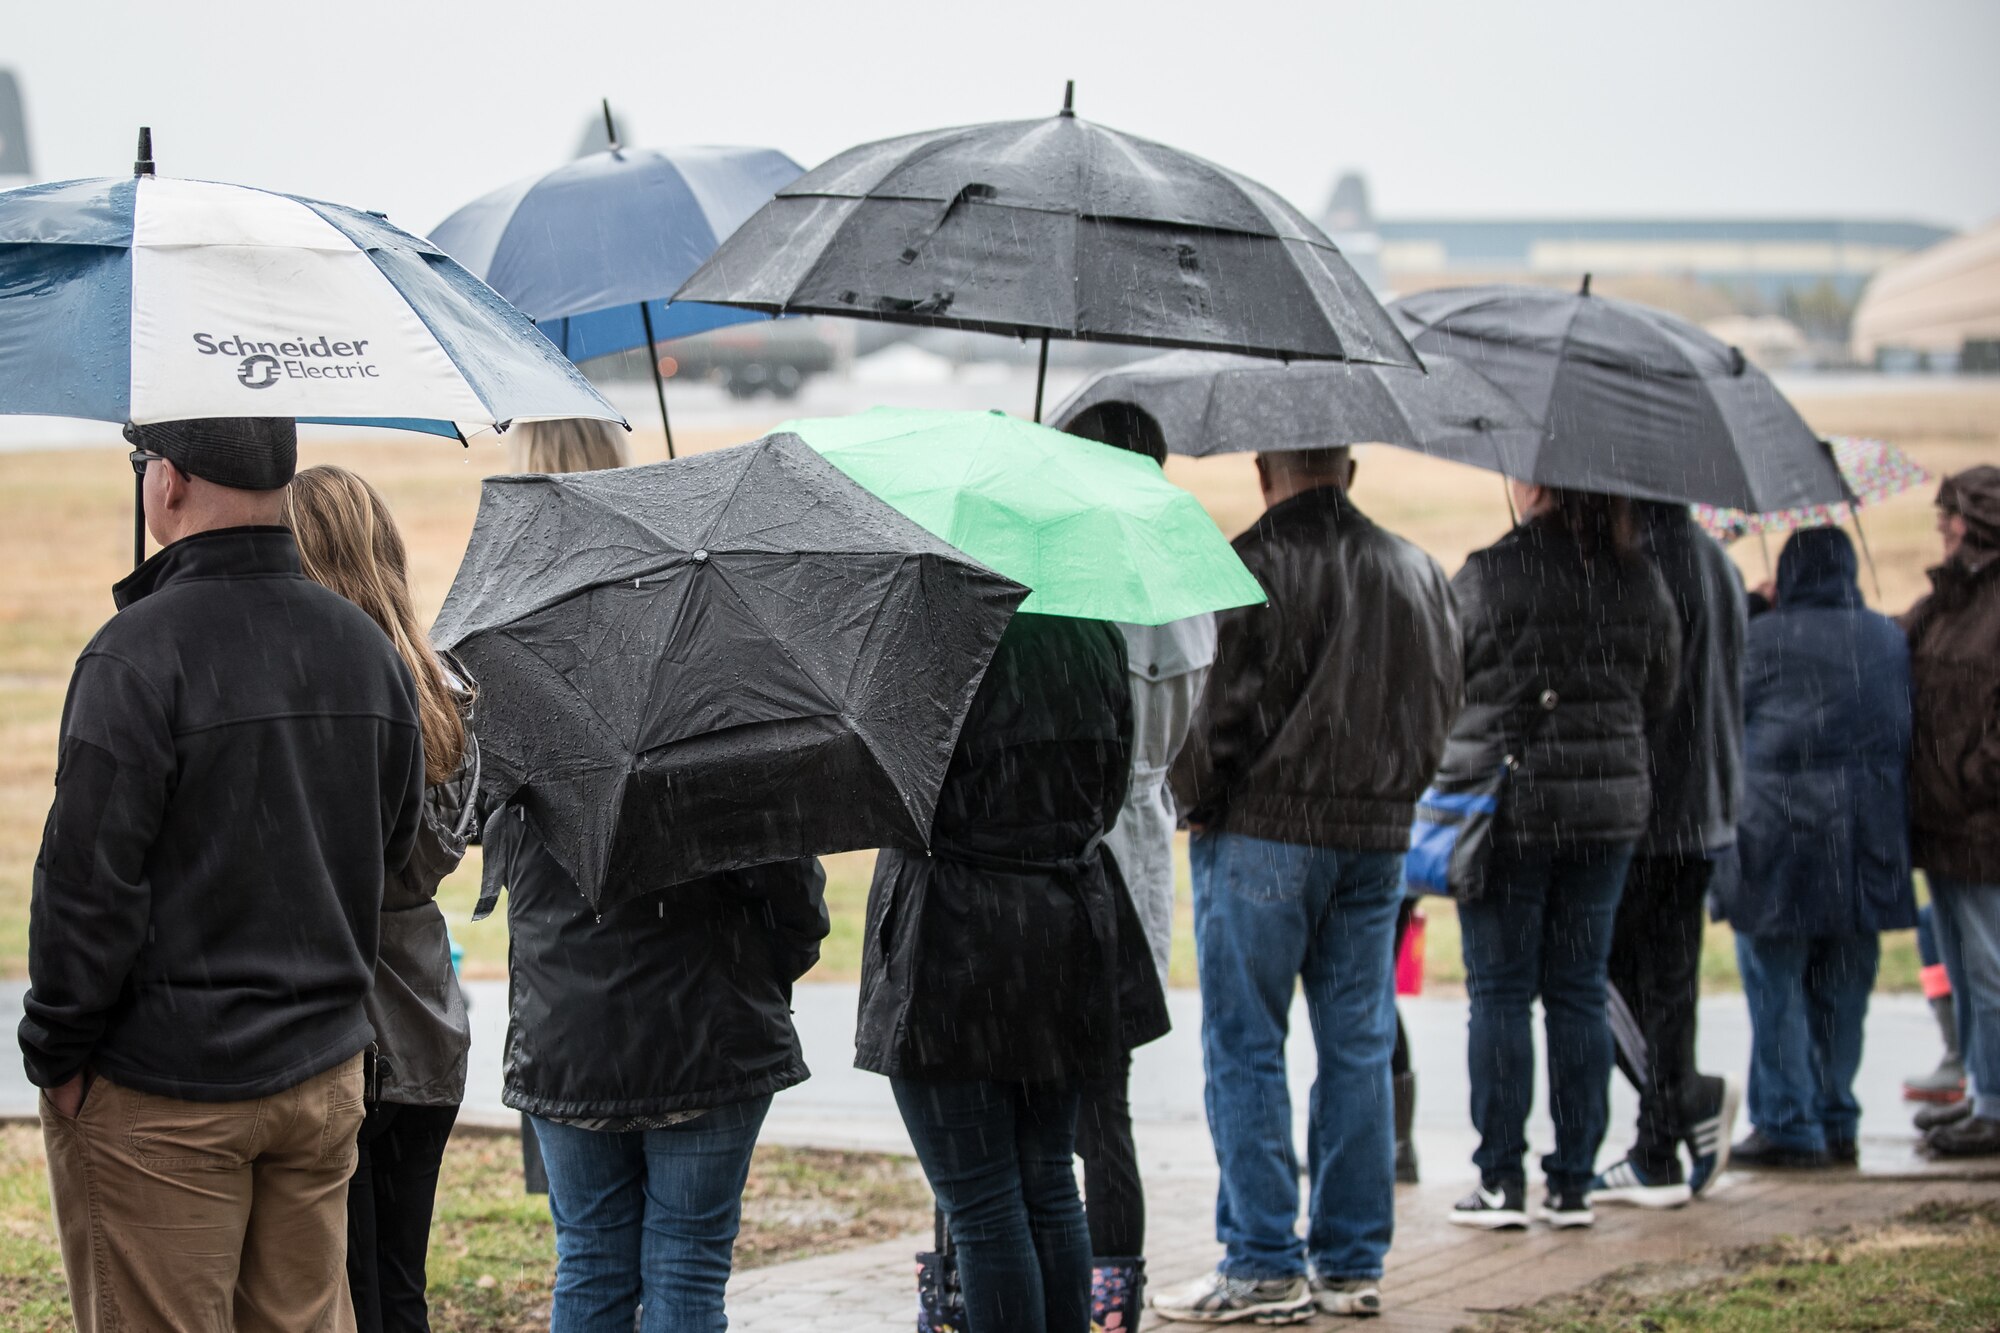 Friends and family of Kentucky Air National Guardsmen wait in the rain at the Kentucky Air National Guard Base in Louisville, Ky., Feb. 23, 2018, as their loved ones prepare to deploy to the Persian Gulf region.The Airmen will spend four months flying troops and cargo across the U.S. Central Command area of responsibility, which Includes Iraq, Afghanistan and northern Africa.